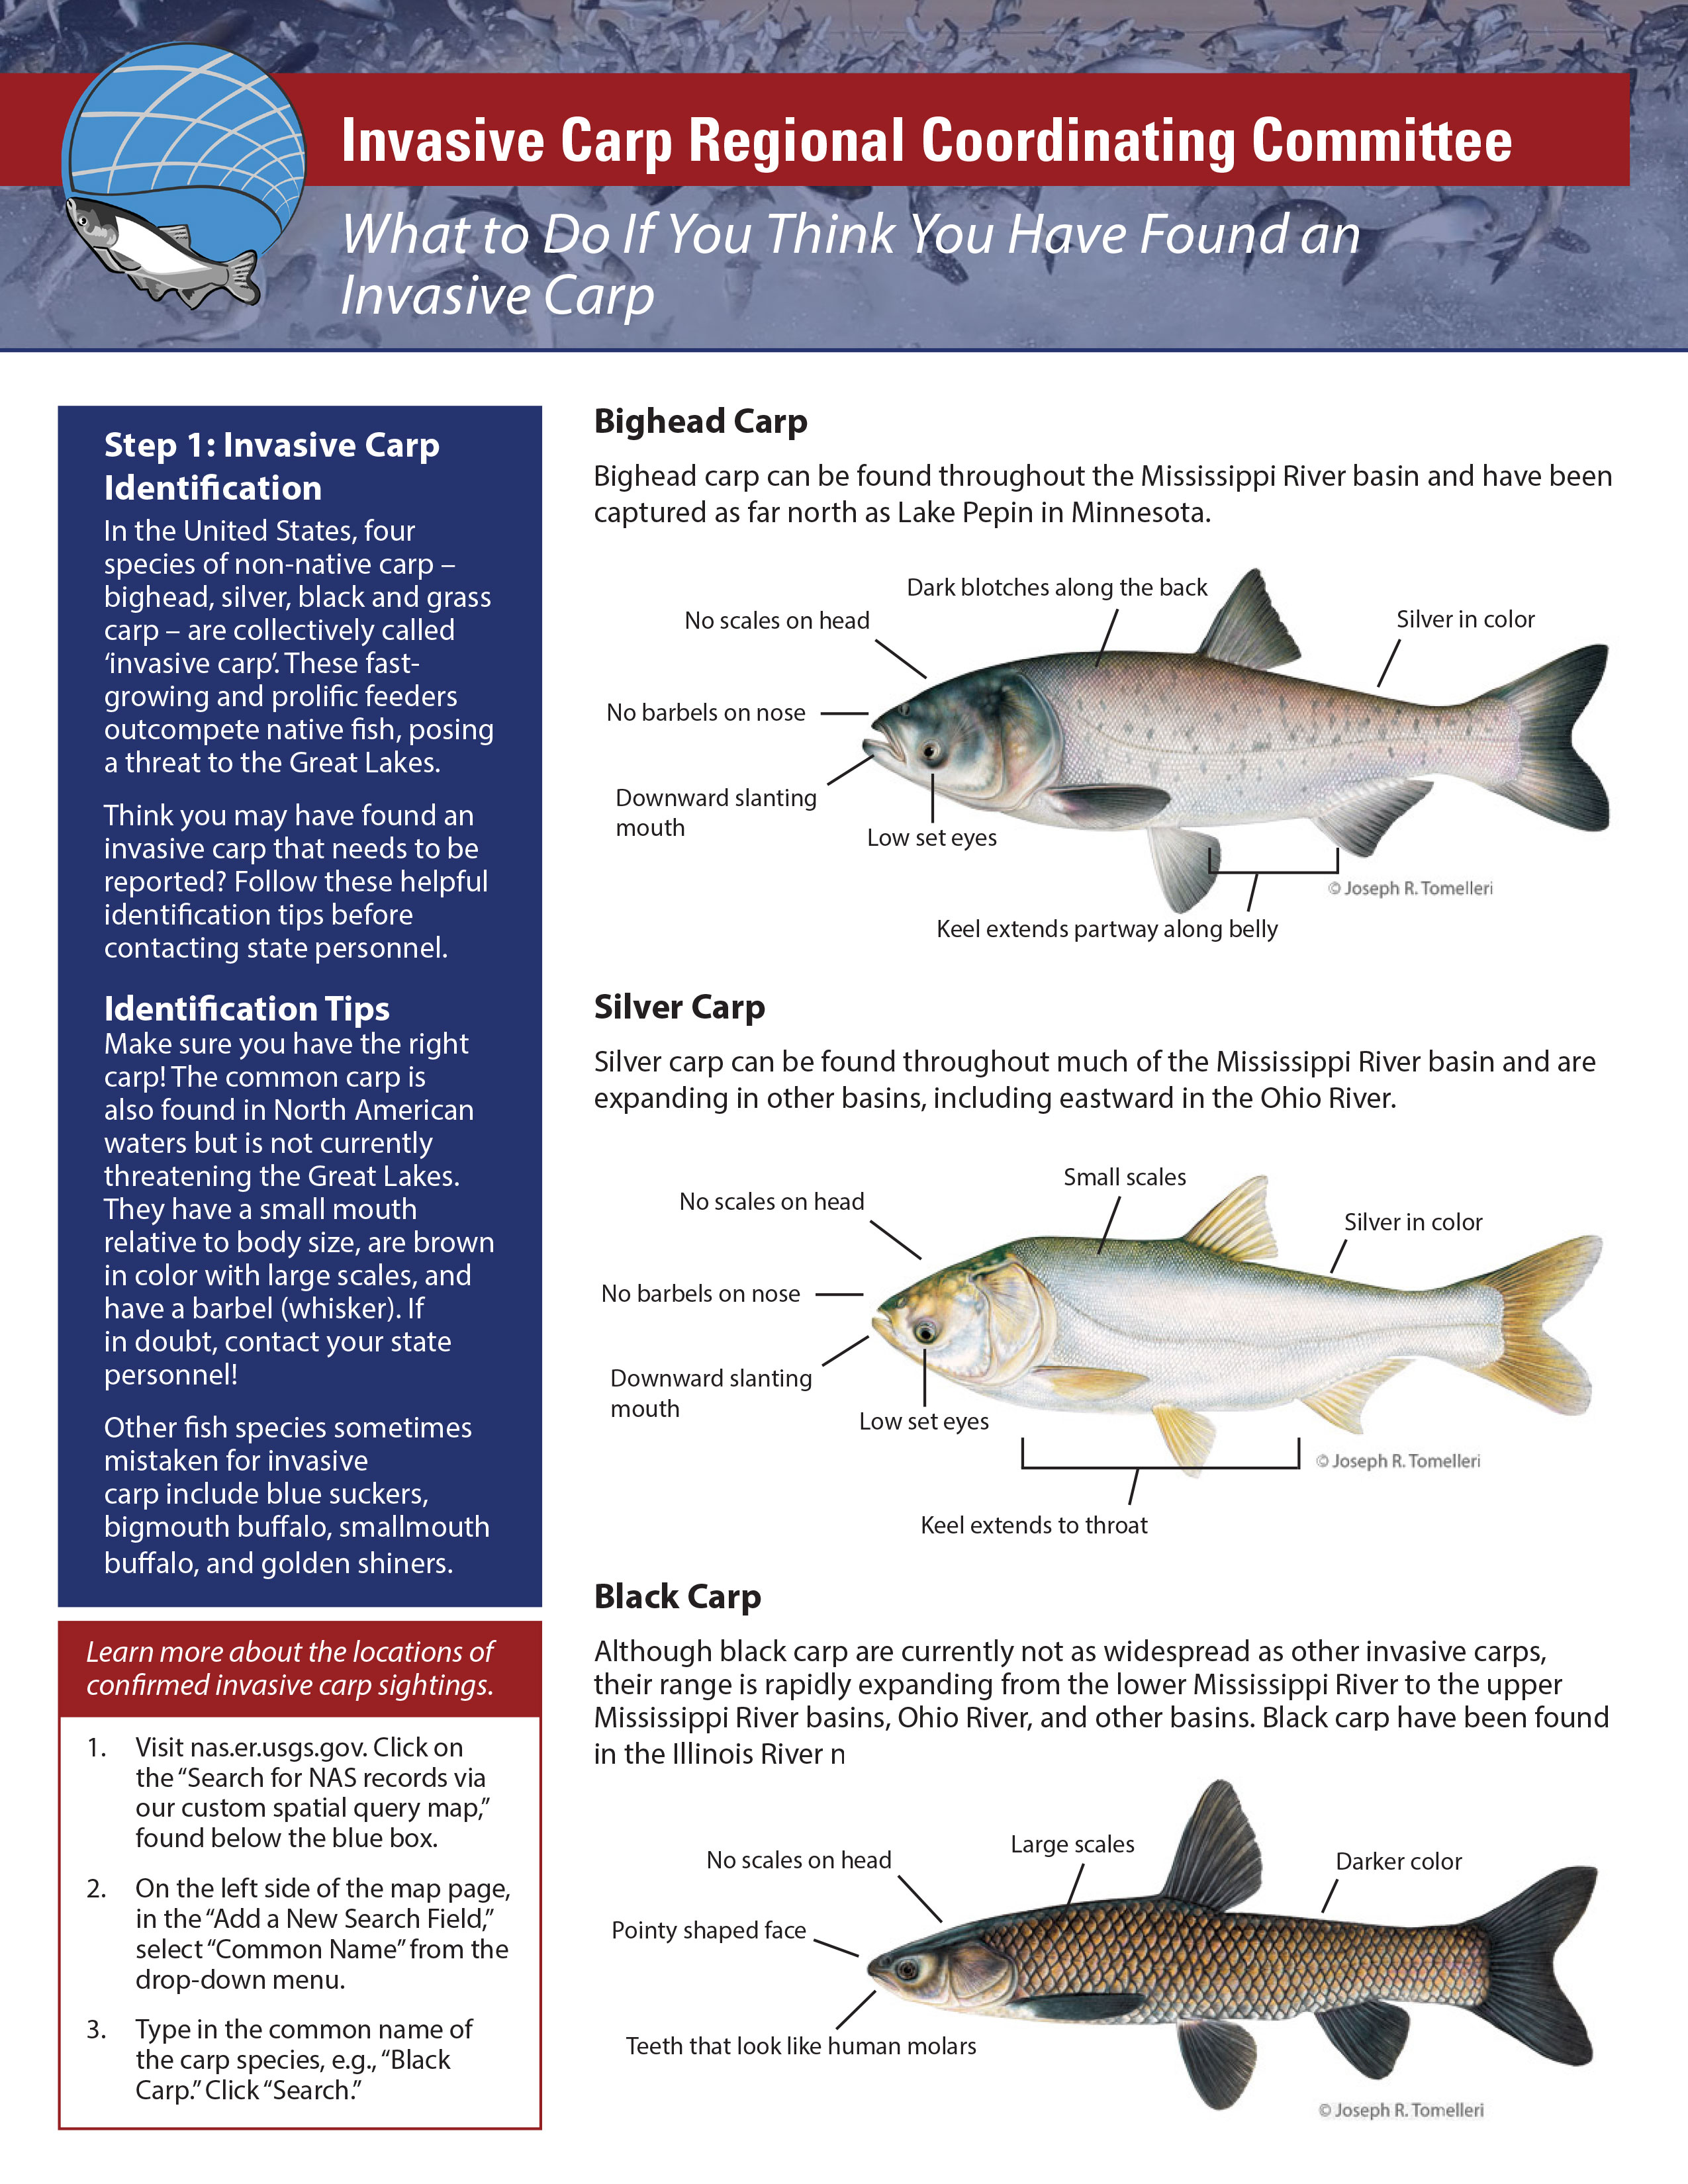 Front page of the What to do if you think you have found an invasive carp handout